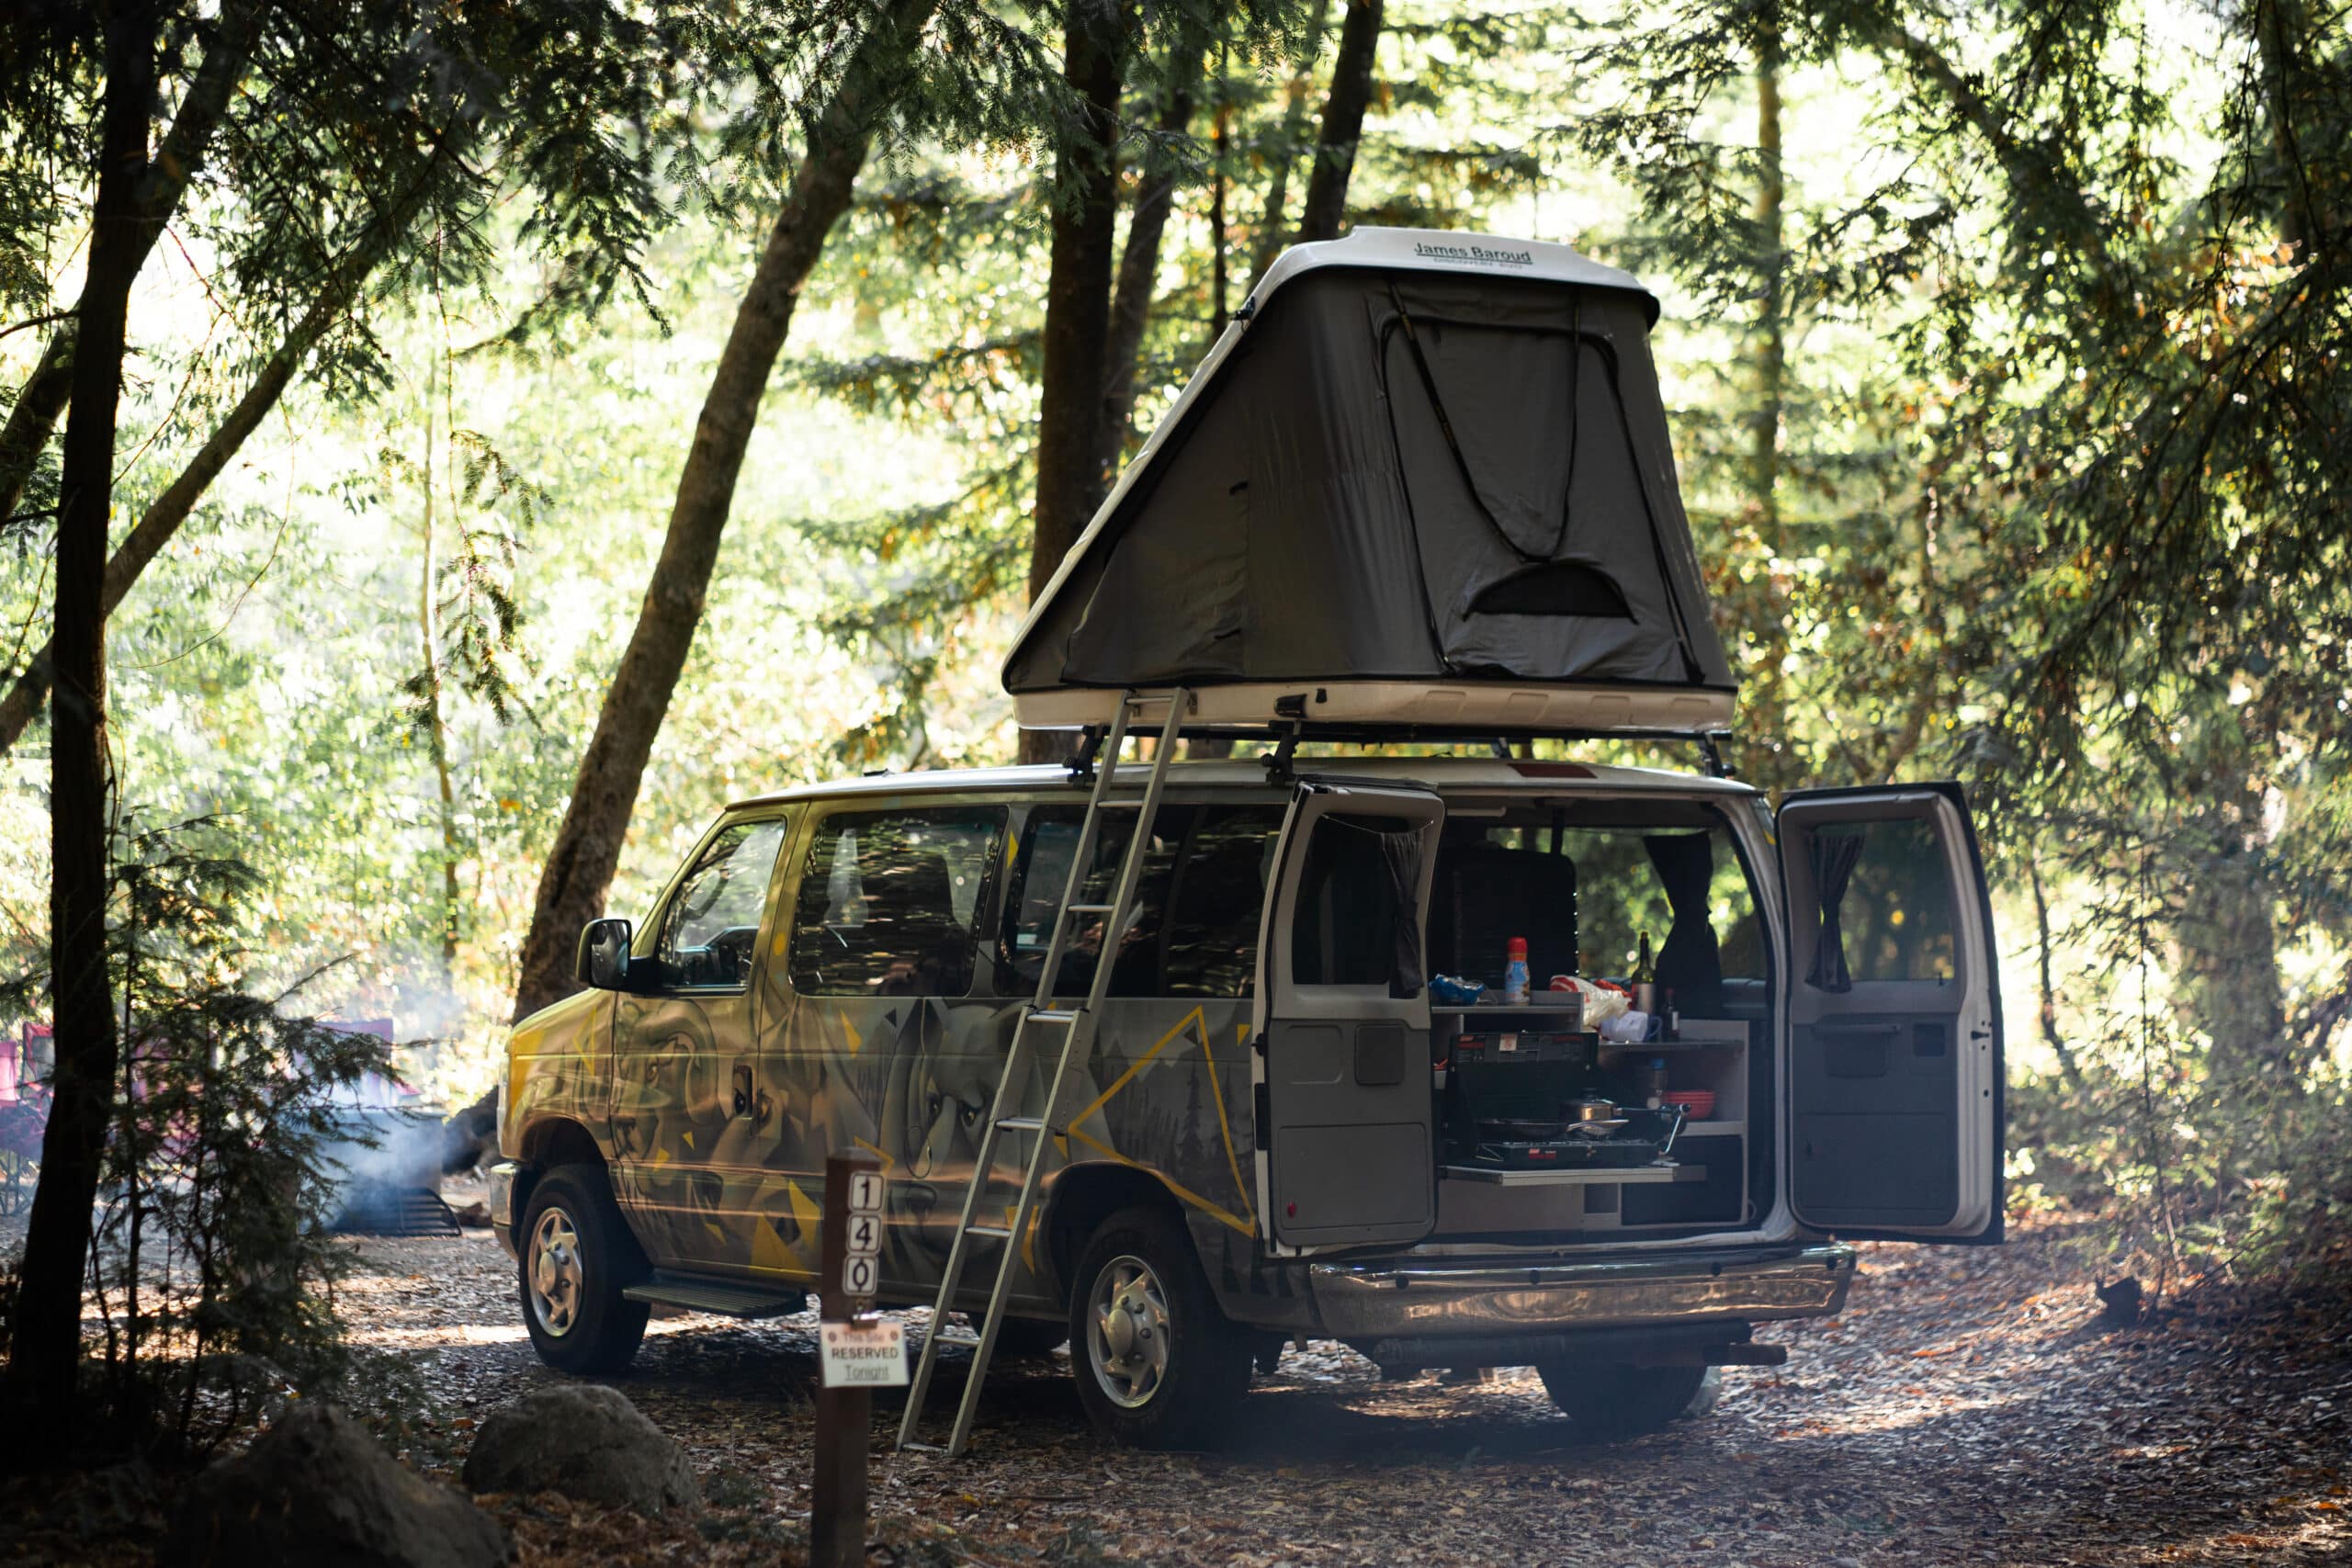 An Escape camper van with a rooftop tent set up to camp in the California woods.